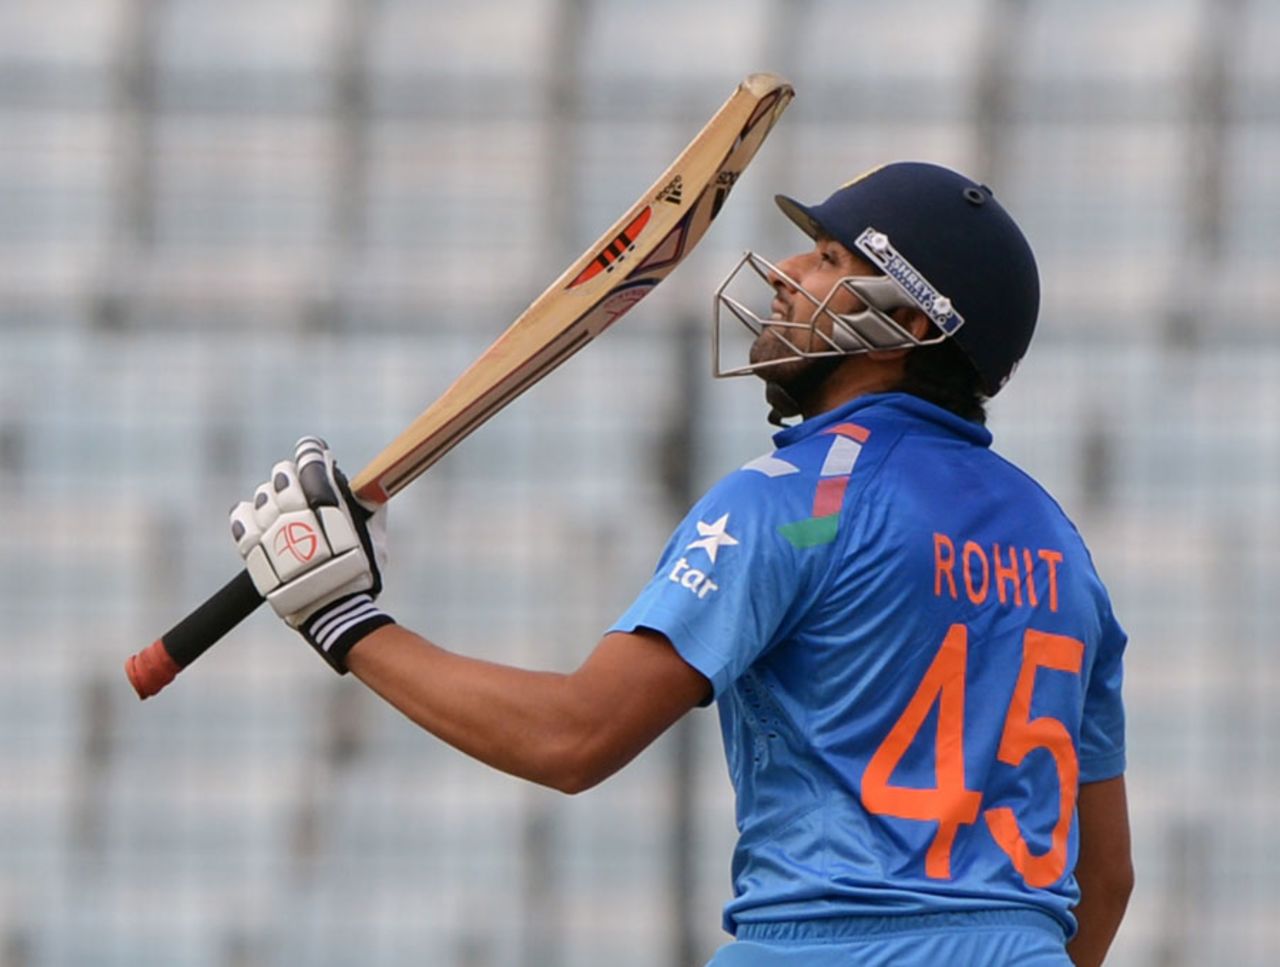 Rohit Sharma raises the bat after reaching his half-century, India v Pakistan, Asia Cup, Mirpur, March 2, 2014